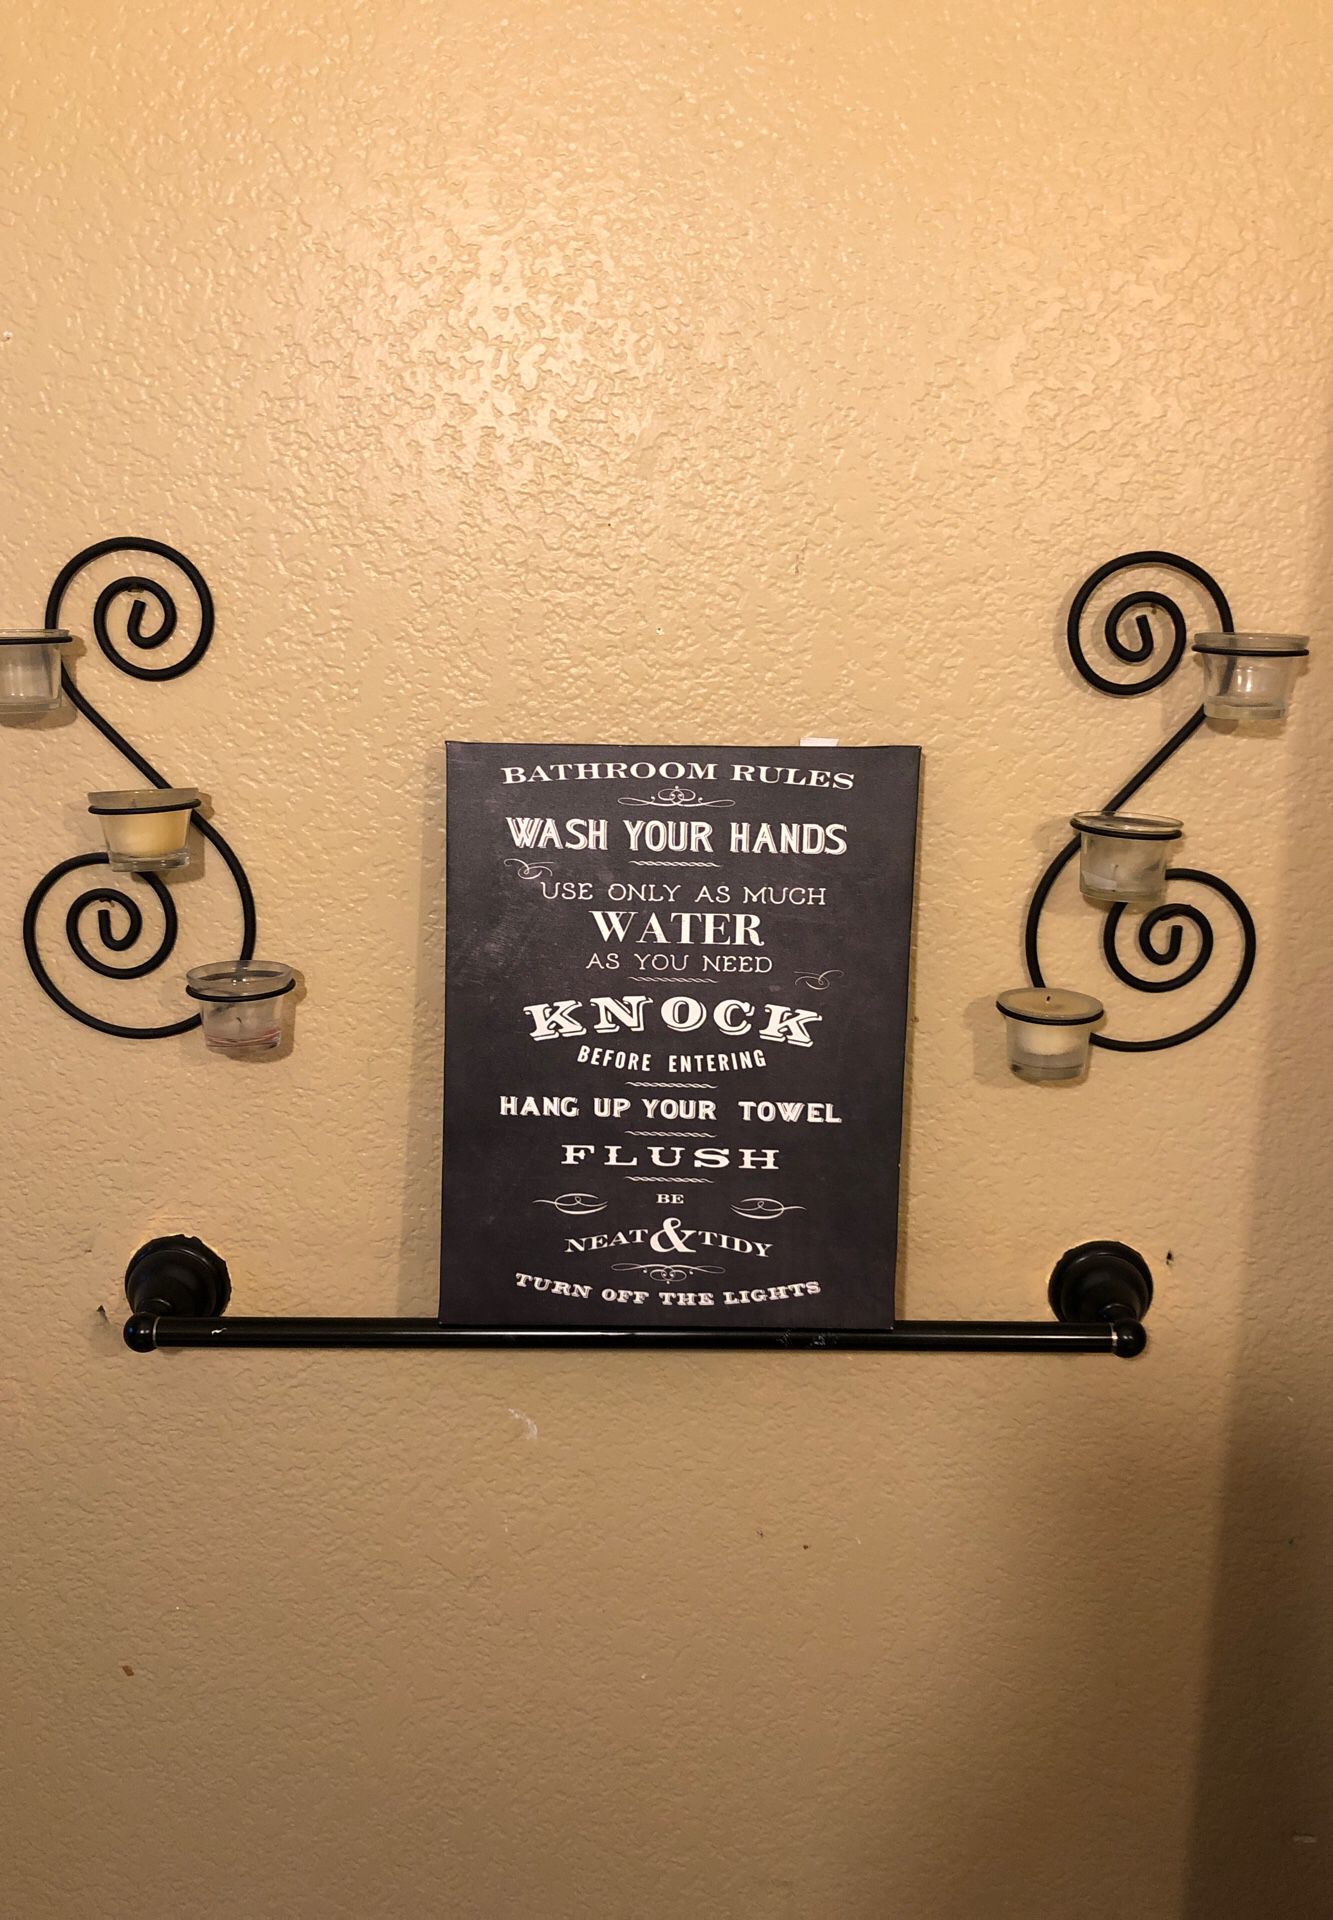 To wall sconces with two candleholders and a bathroom sign.